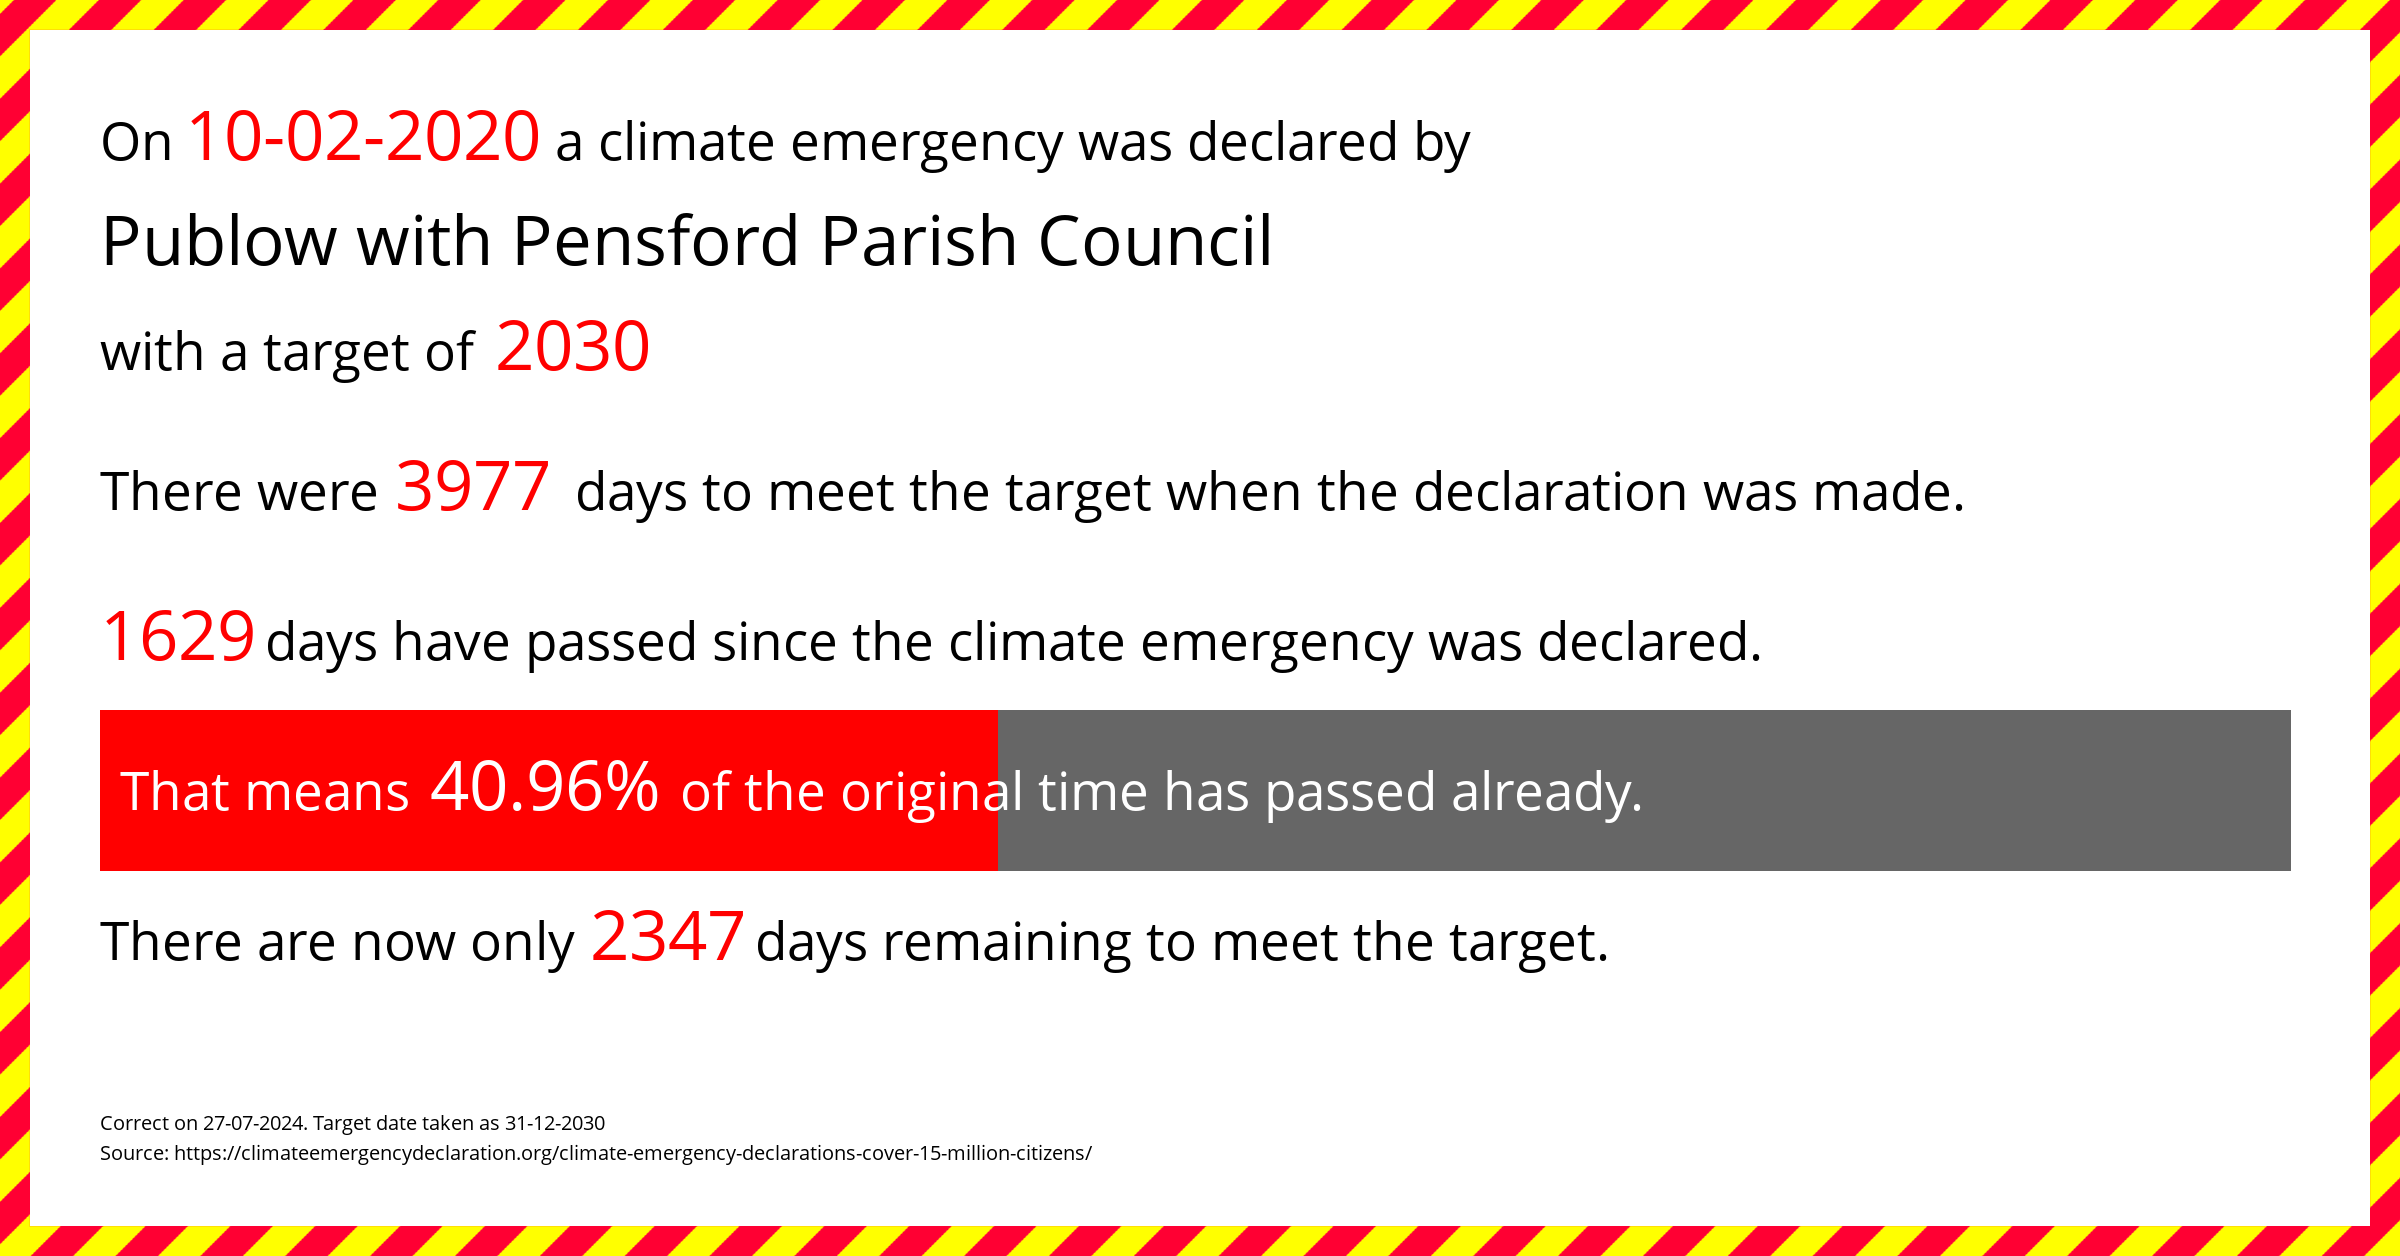 Publow with Pensford Parish Council  declared a Climate emergency on Monday 10th February 2020, with a target of 2030.